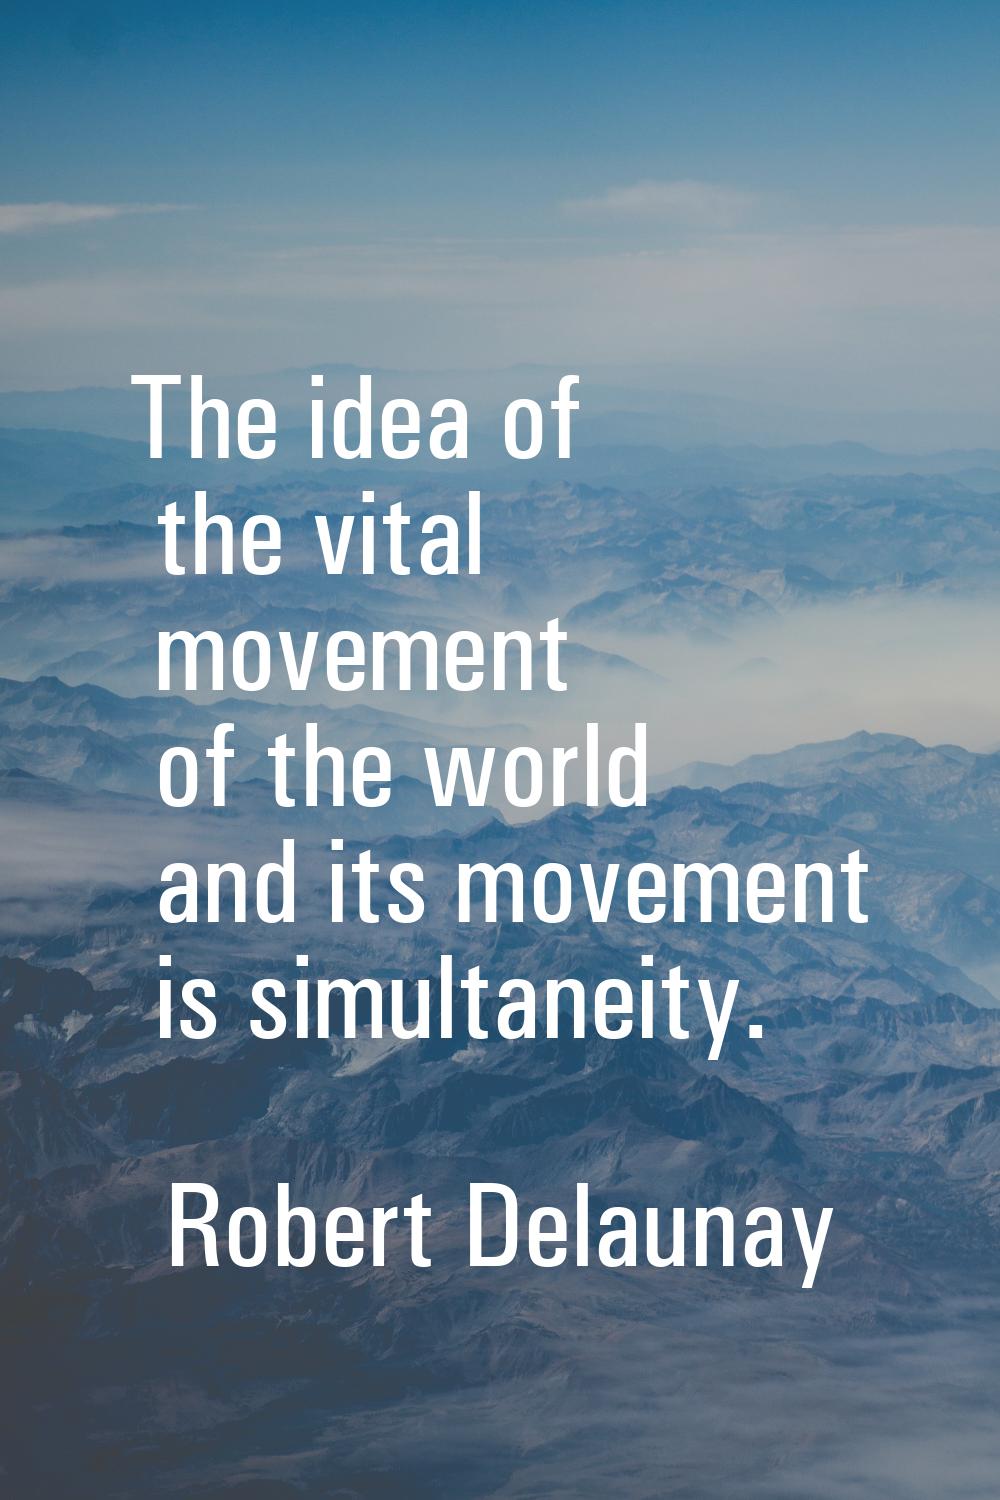 The idea of the vital movement of the world and its movement is simultaneity.